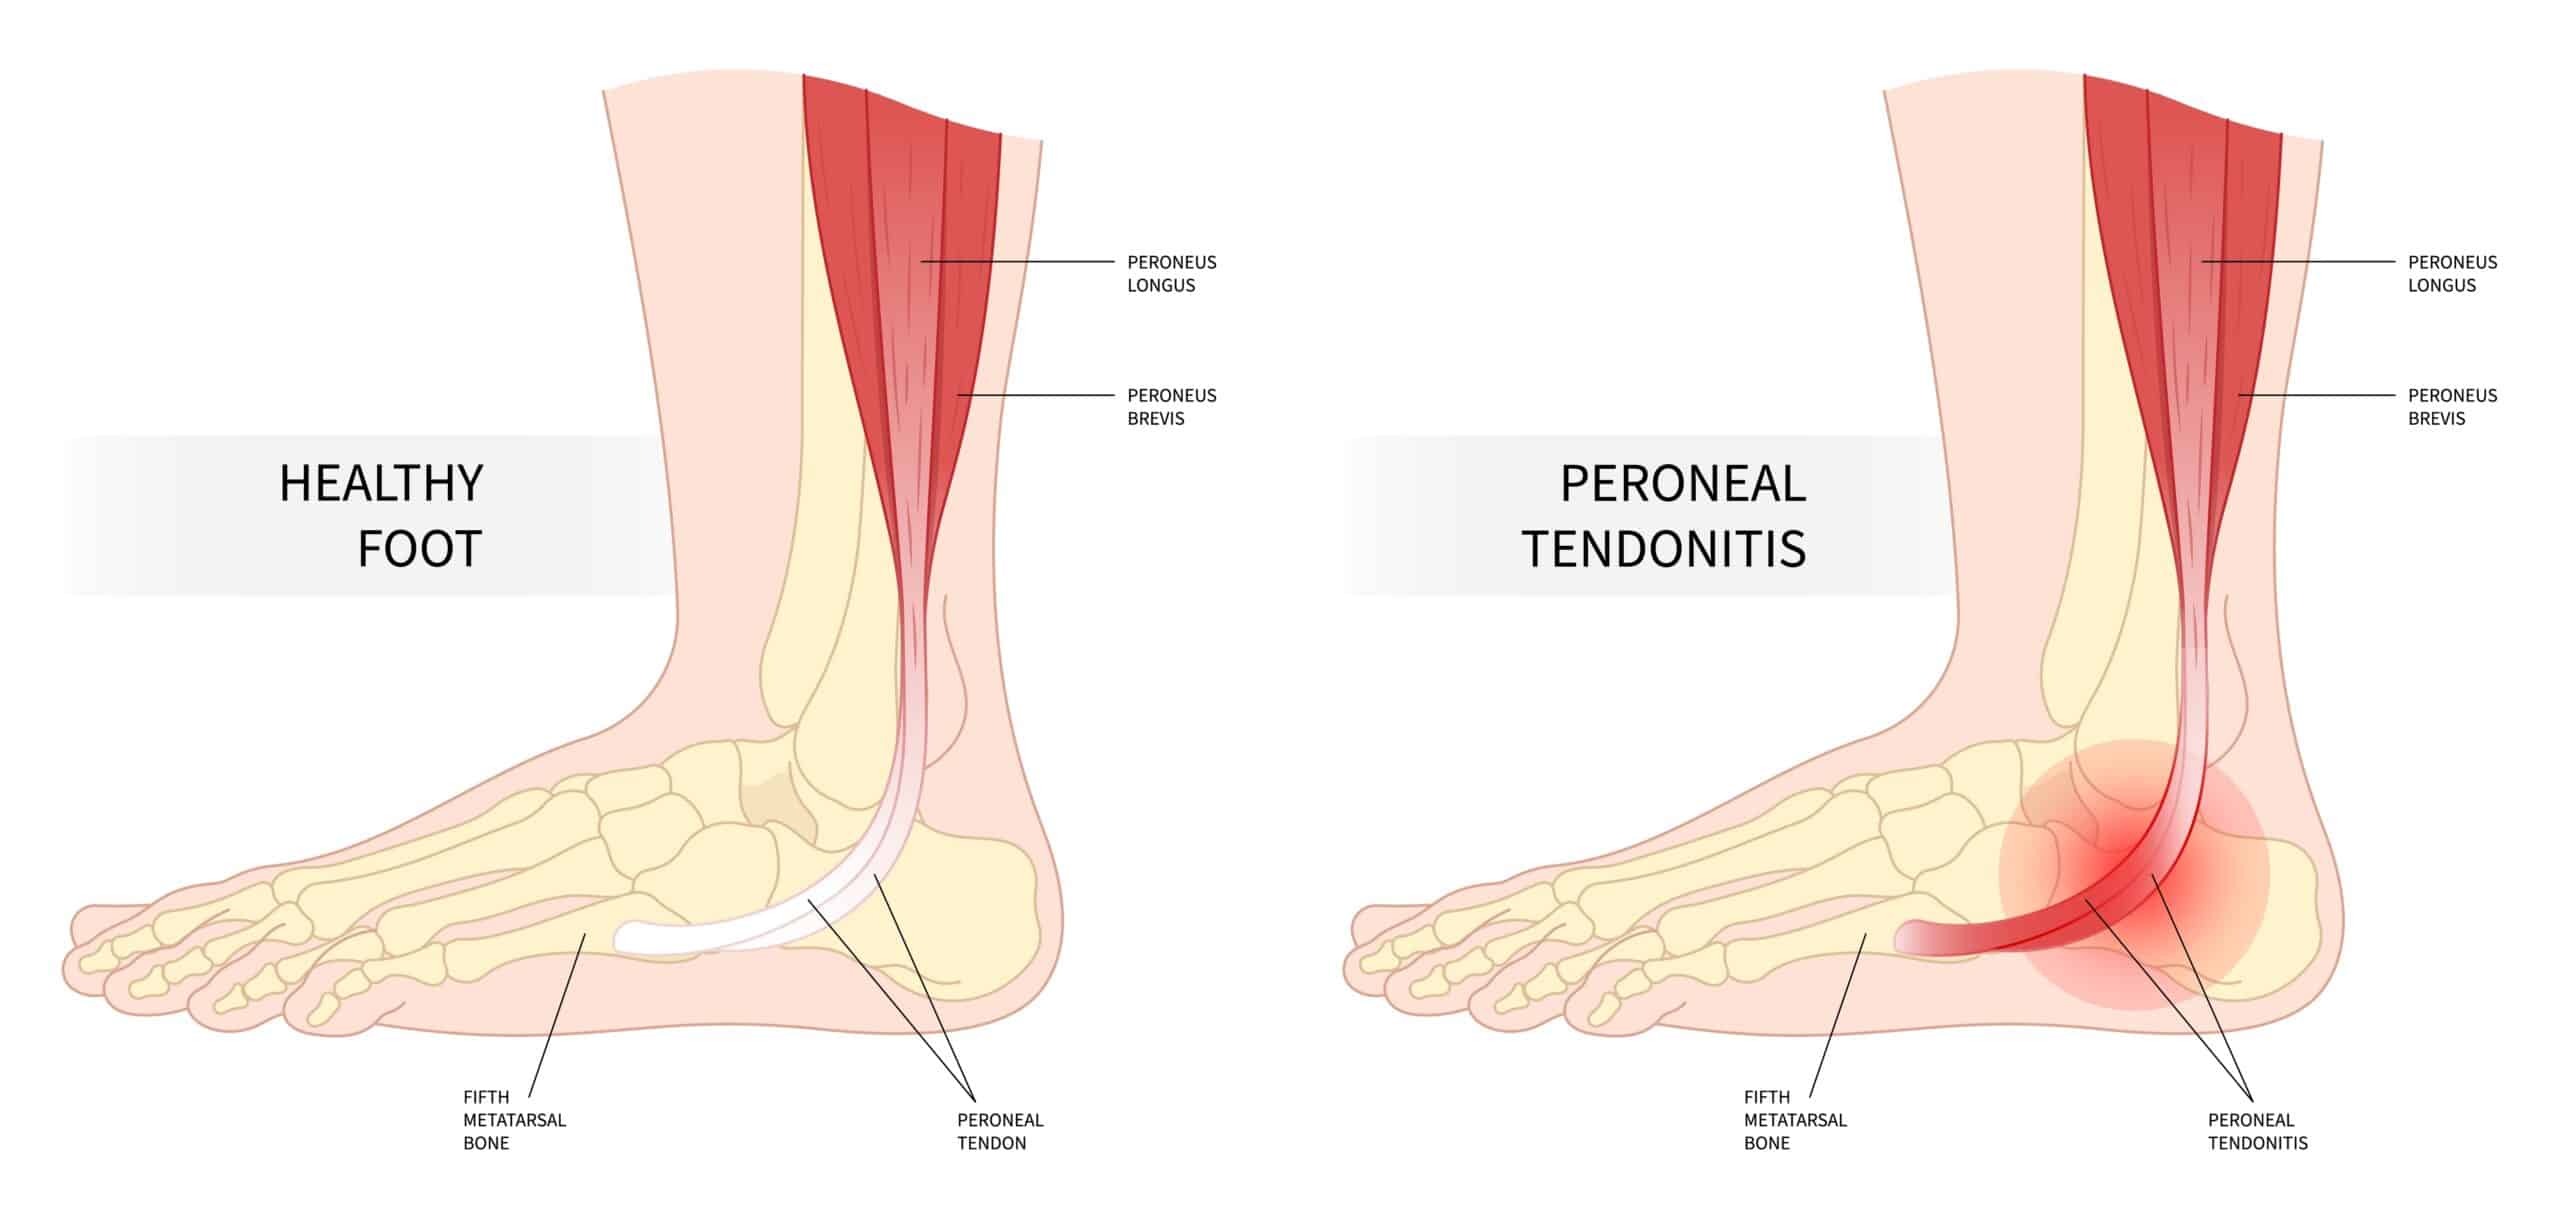 Peroneal Tendonitis: Symptoms, Causes and Treatment